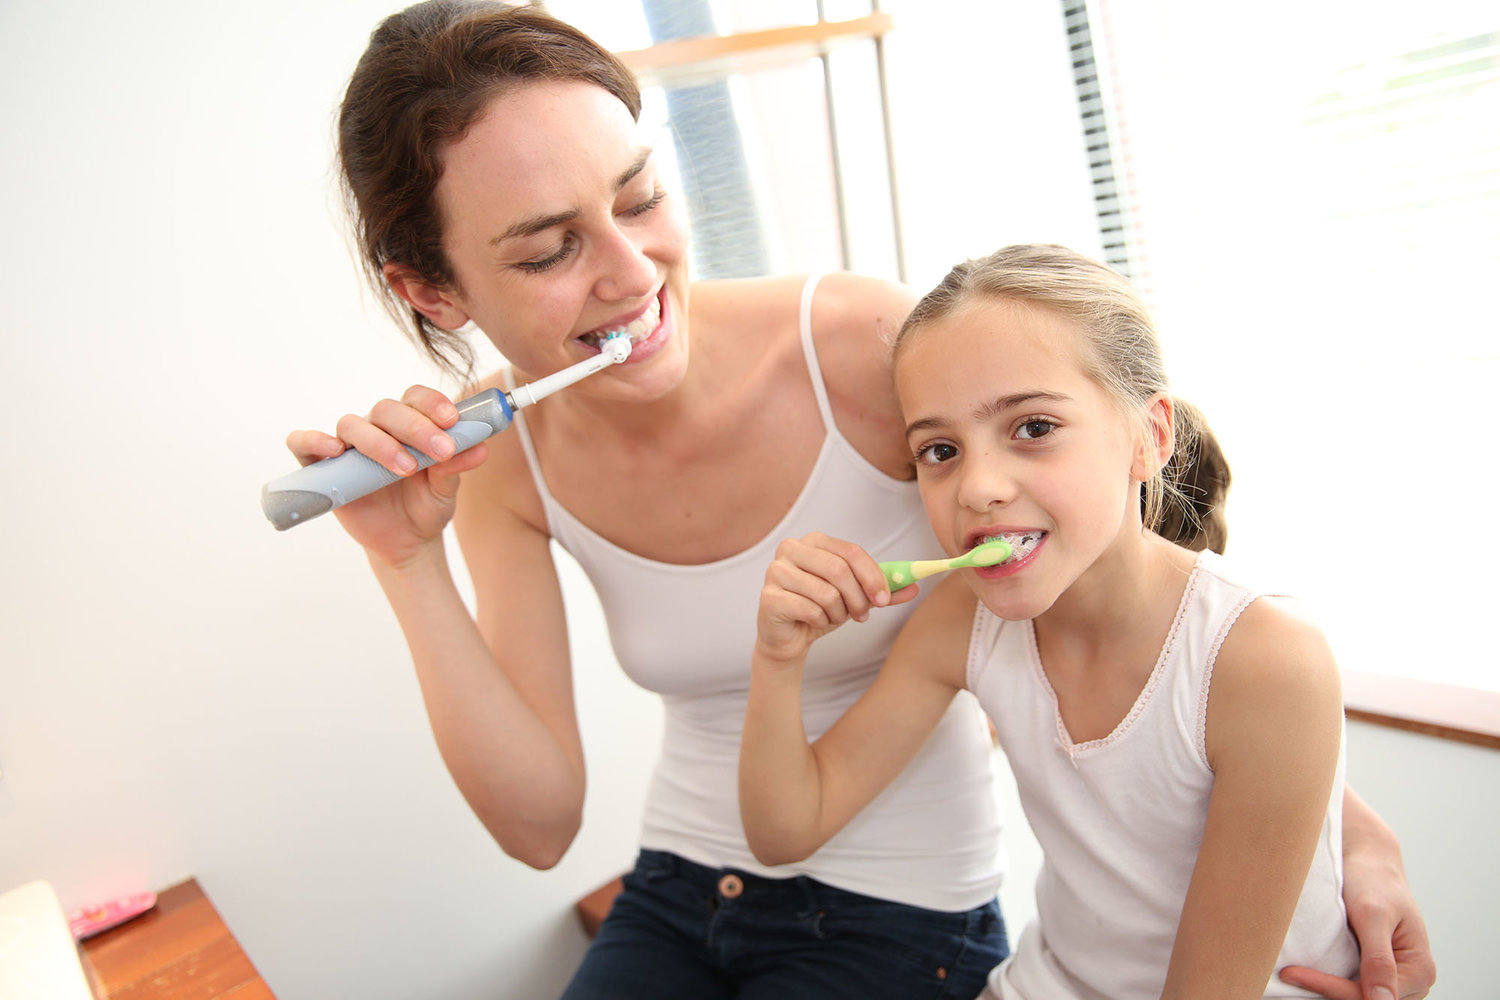 How Long After Eating Should You Brush Your Teeth